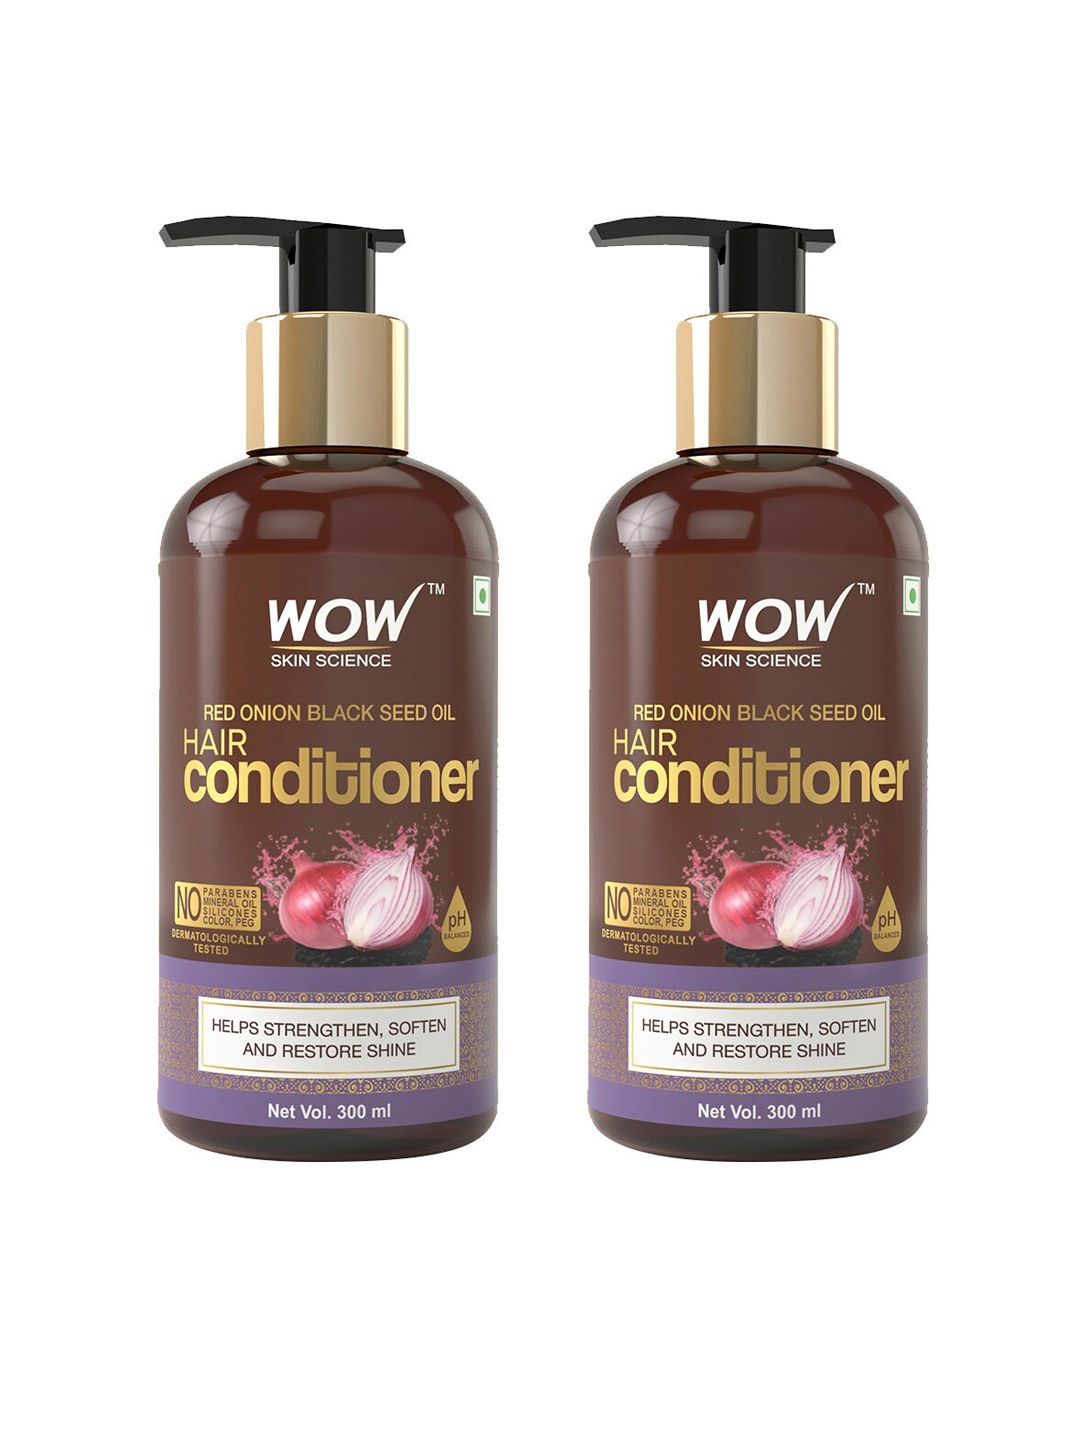 WOW SKIN SCIENCE Set of 2 Red Onion Black Seed Oil Hair Conditioner Price in India